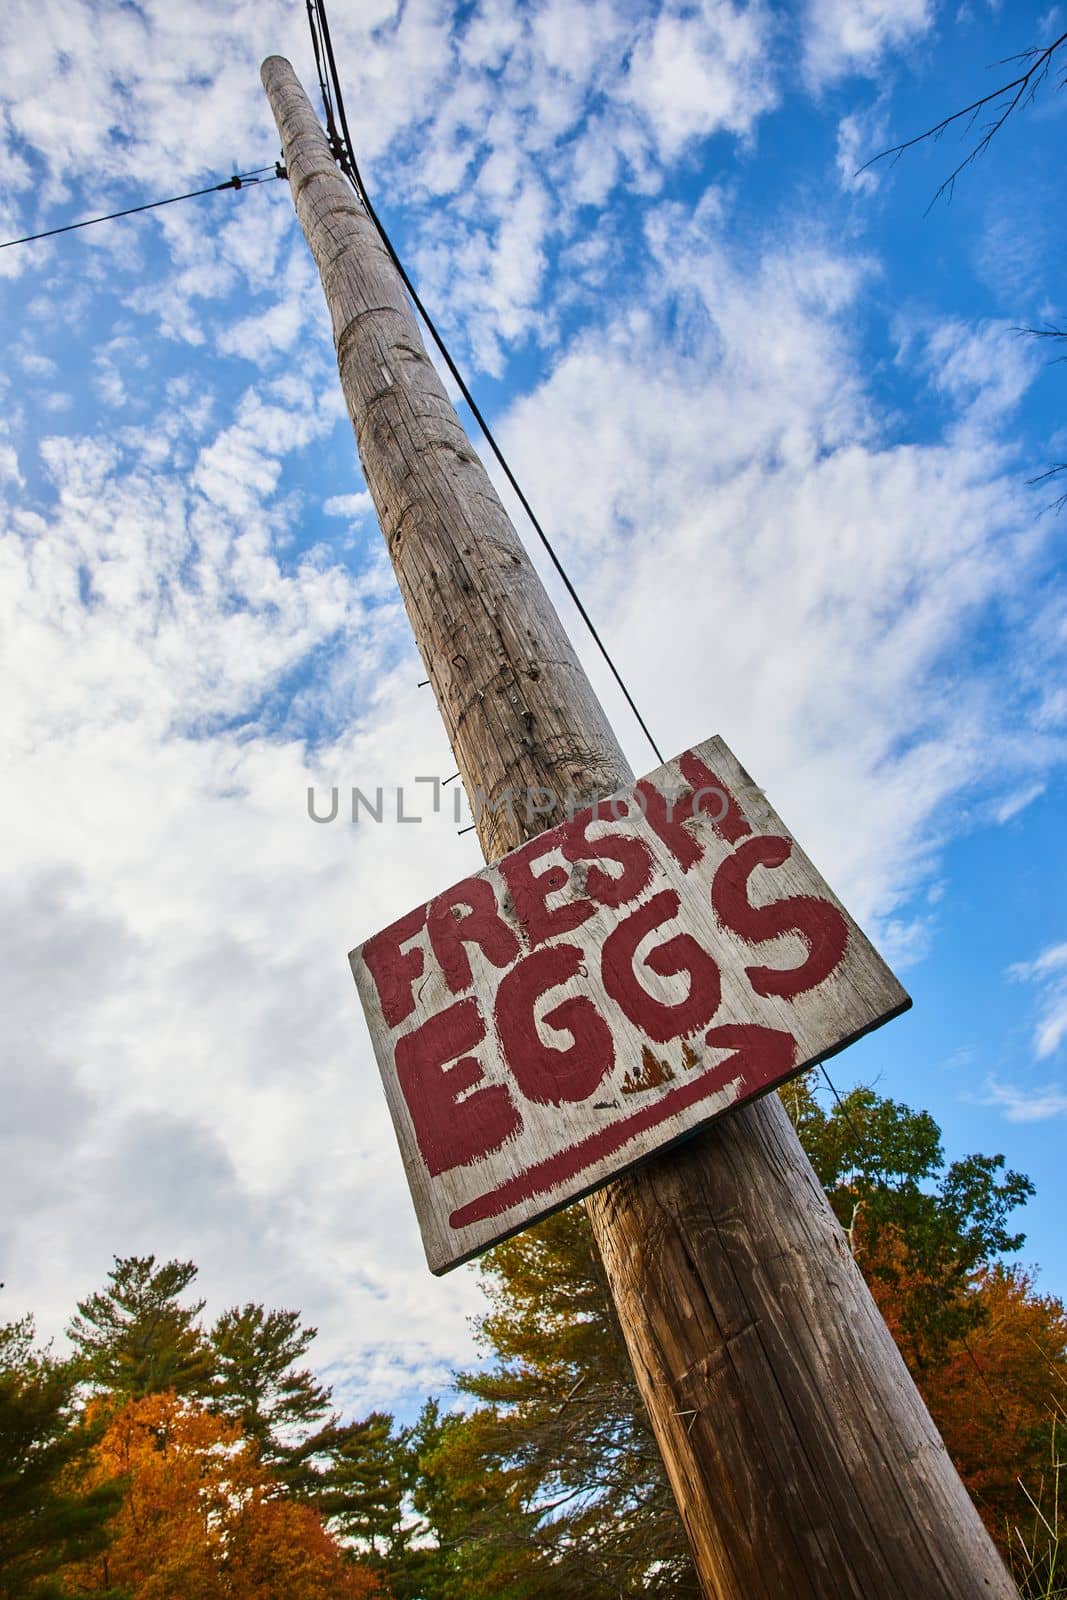 Image of Telephone pole with simple Fresh Eggs sign